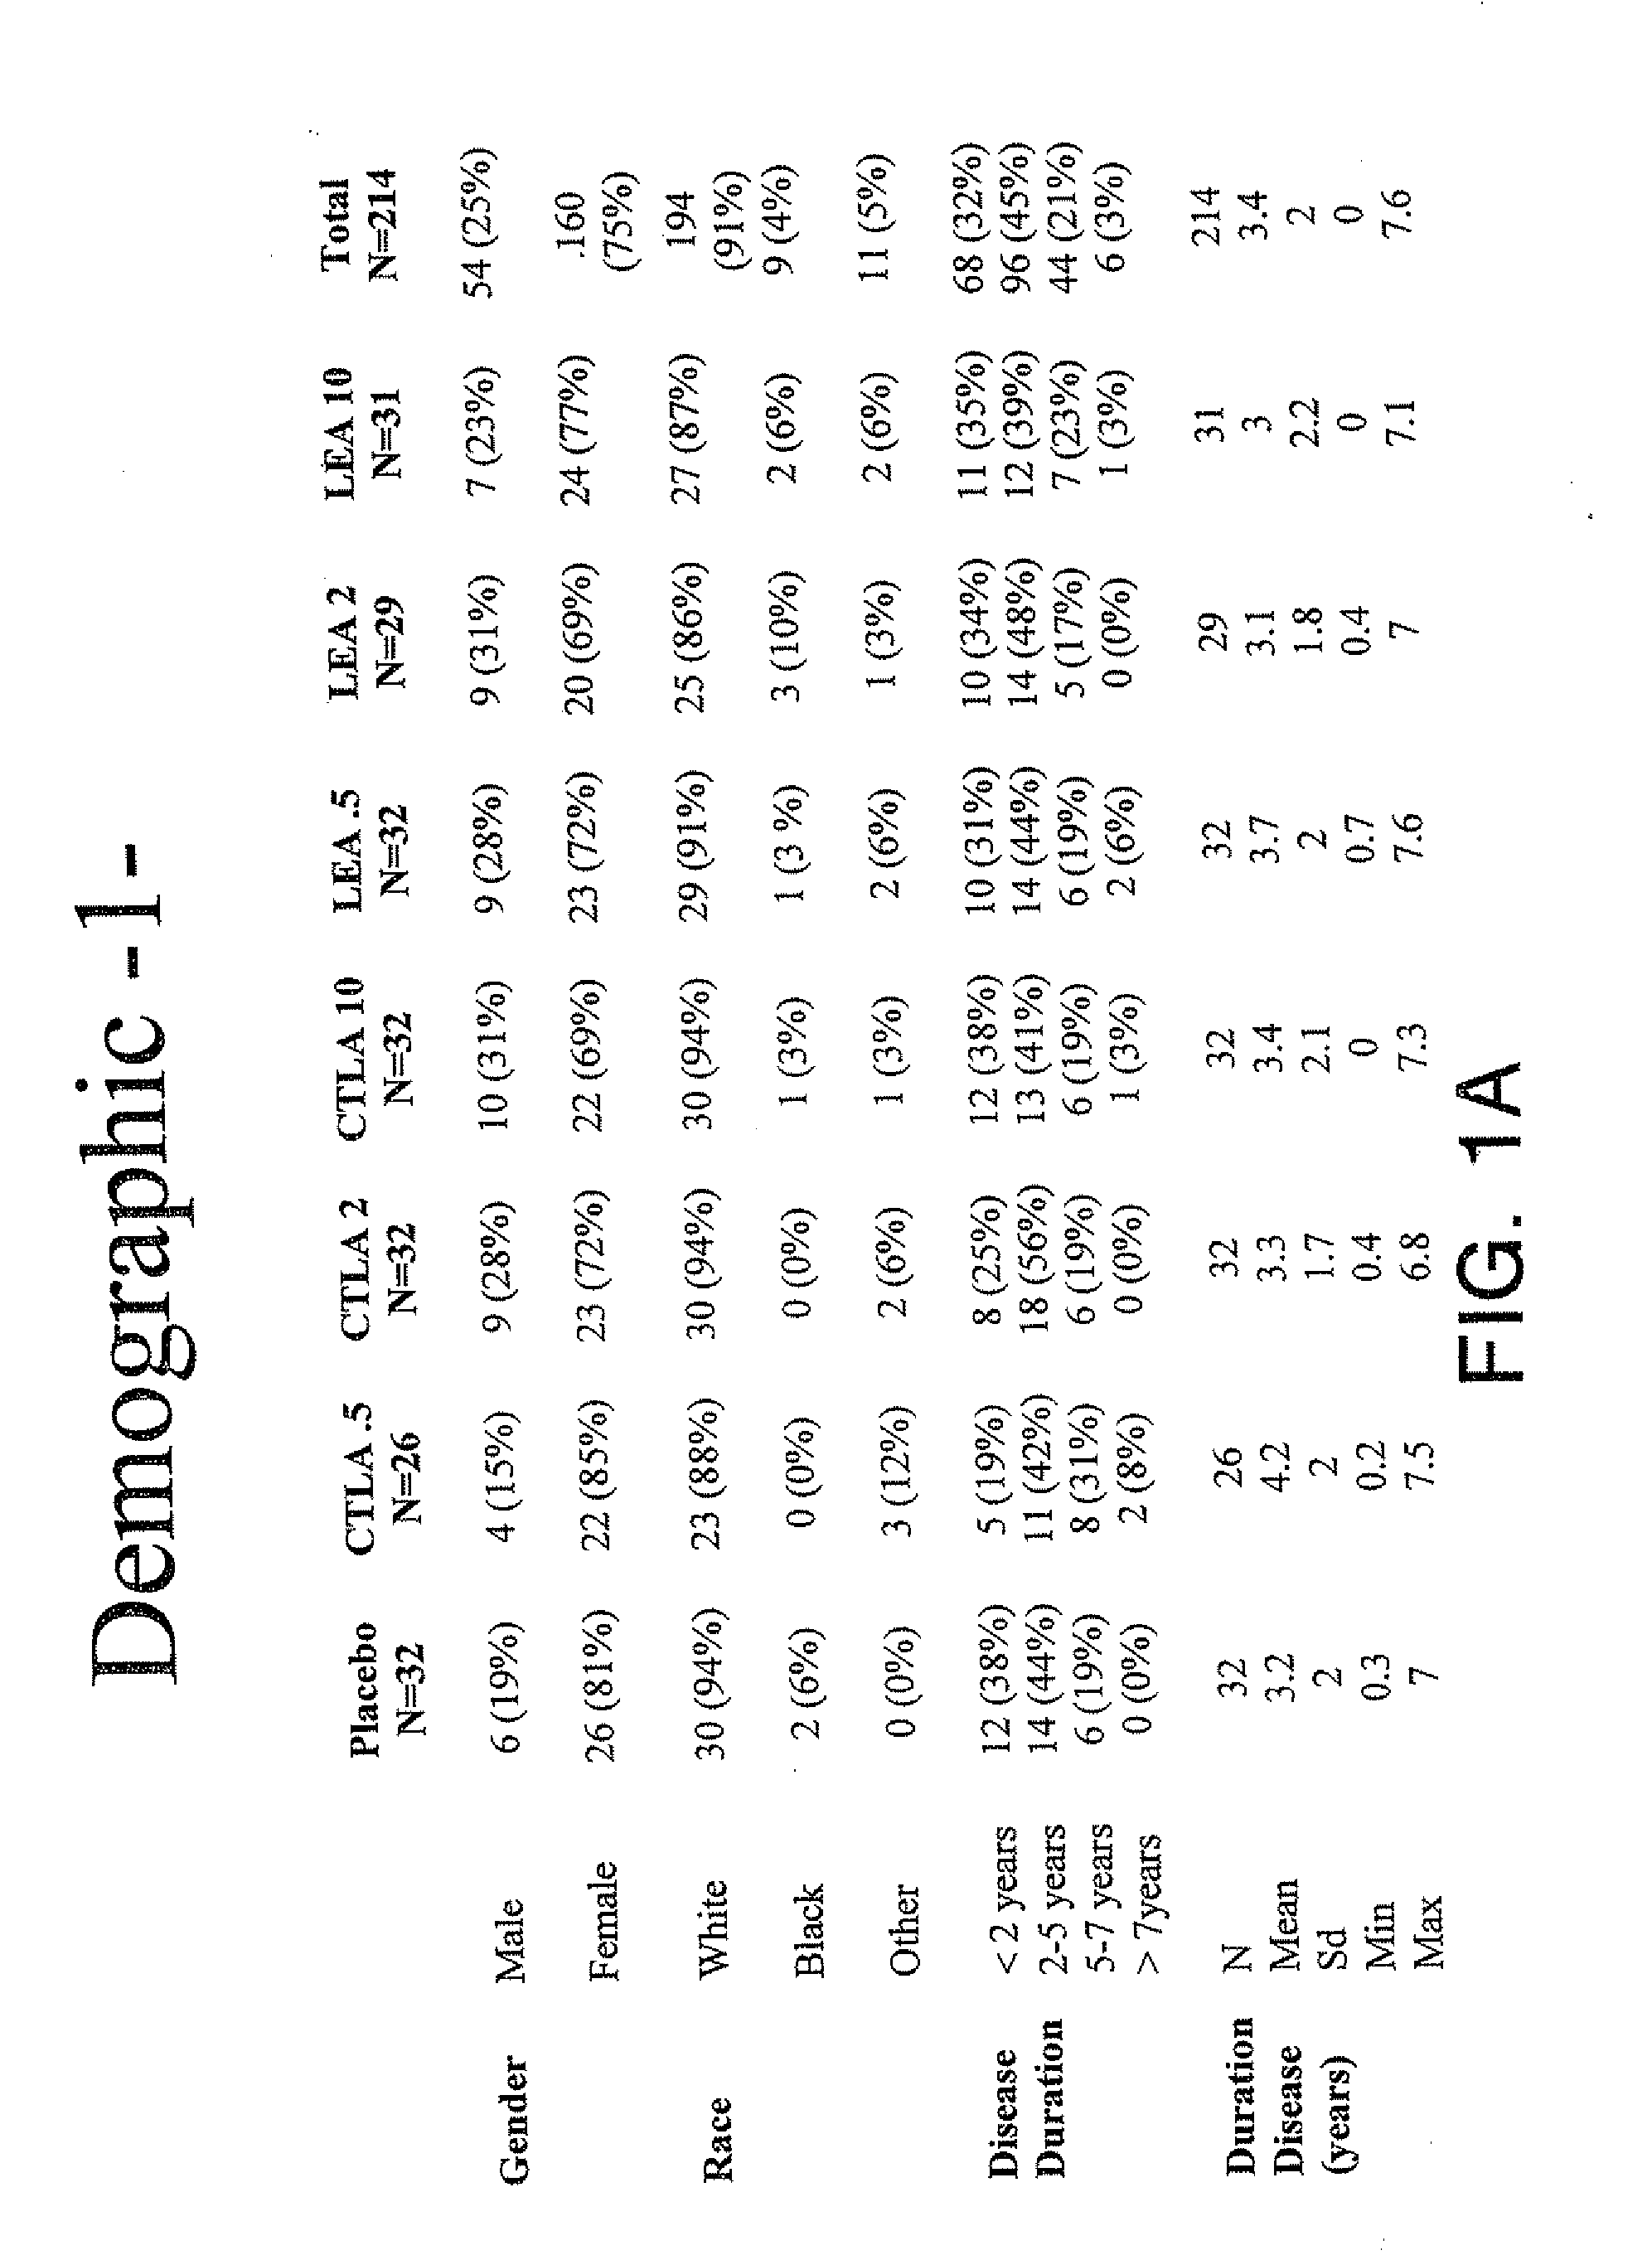 Method for treating an autoimmune disease using a soluble ctla4 molecule and a dmard or nsaid